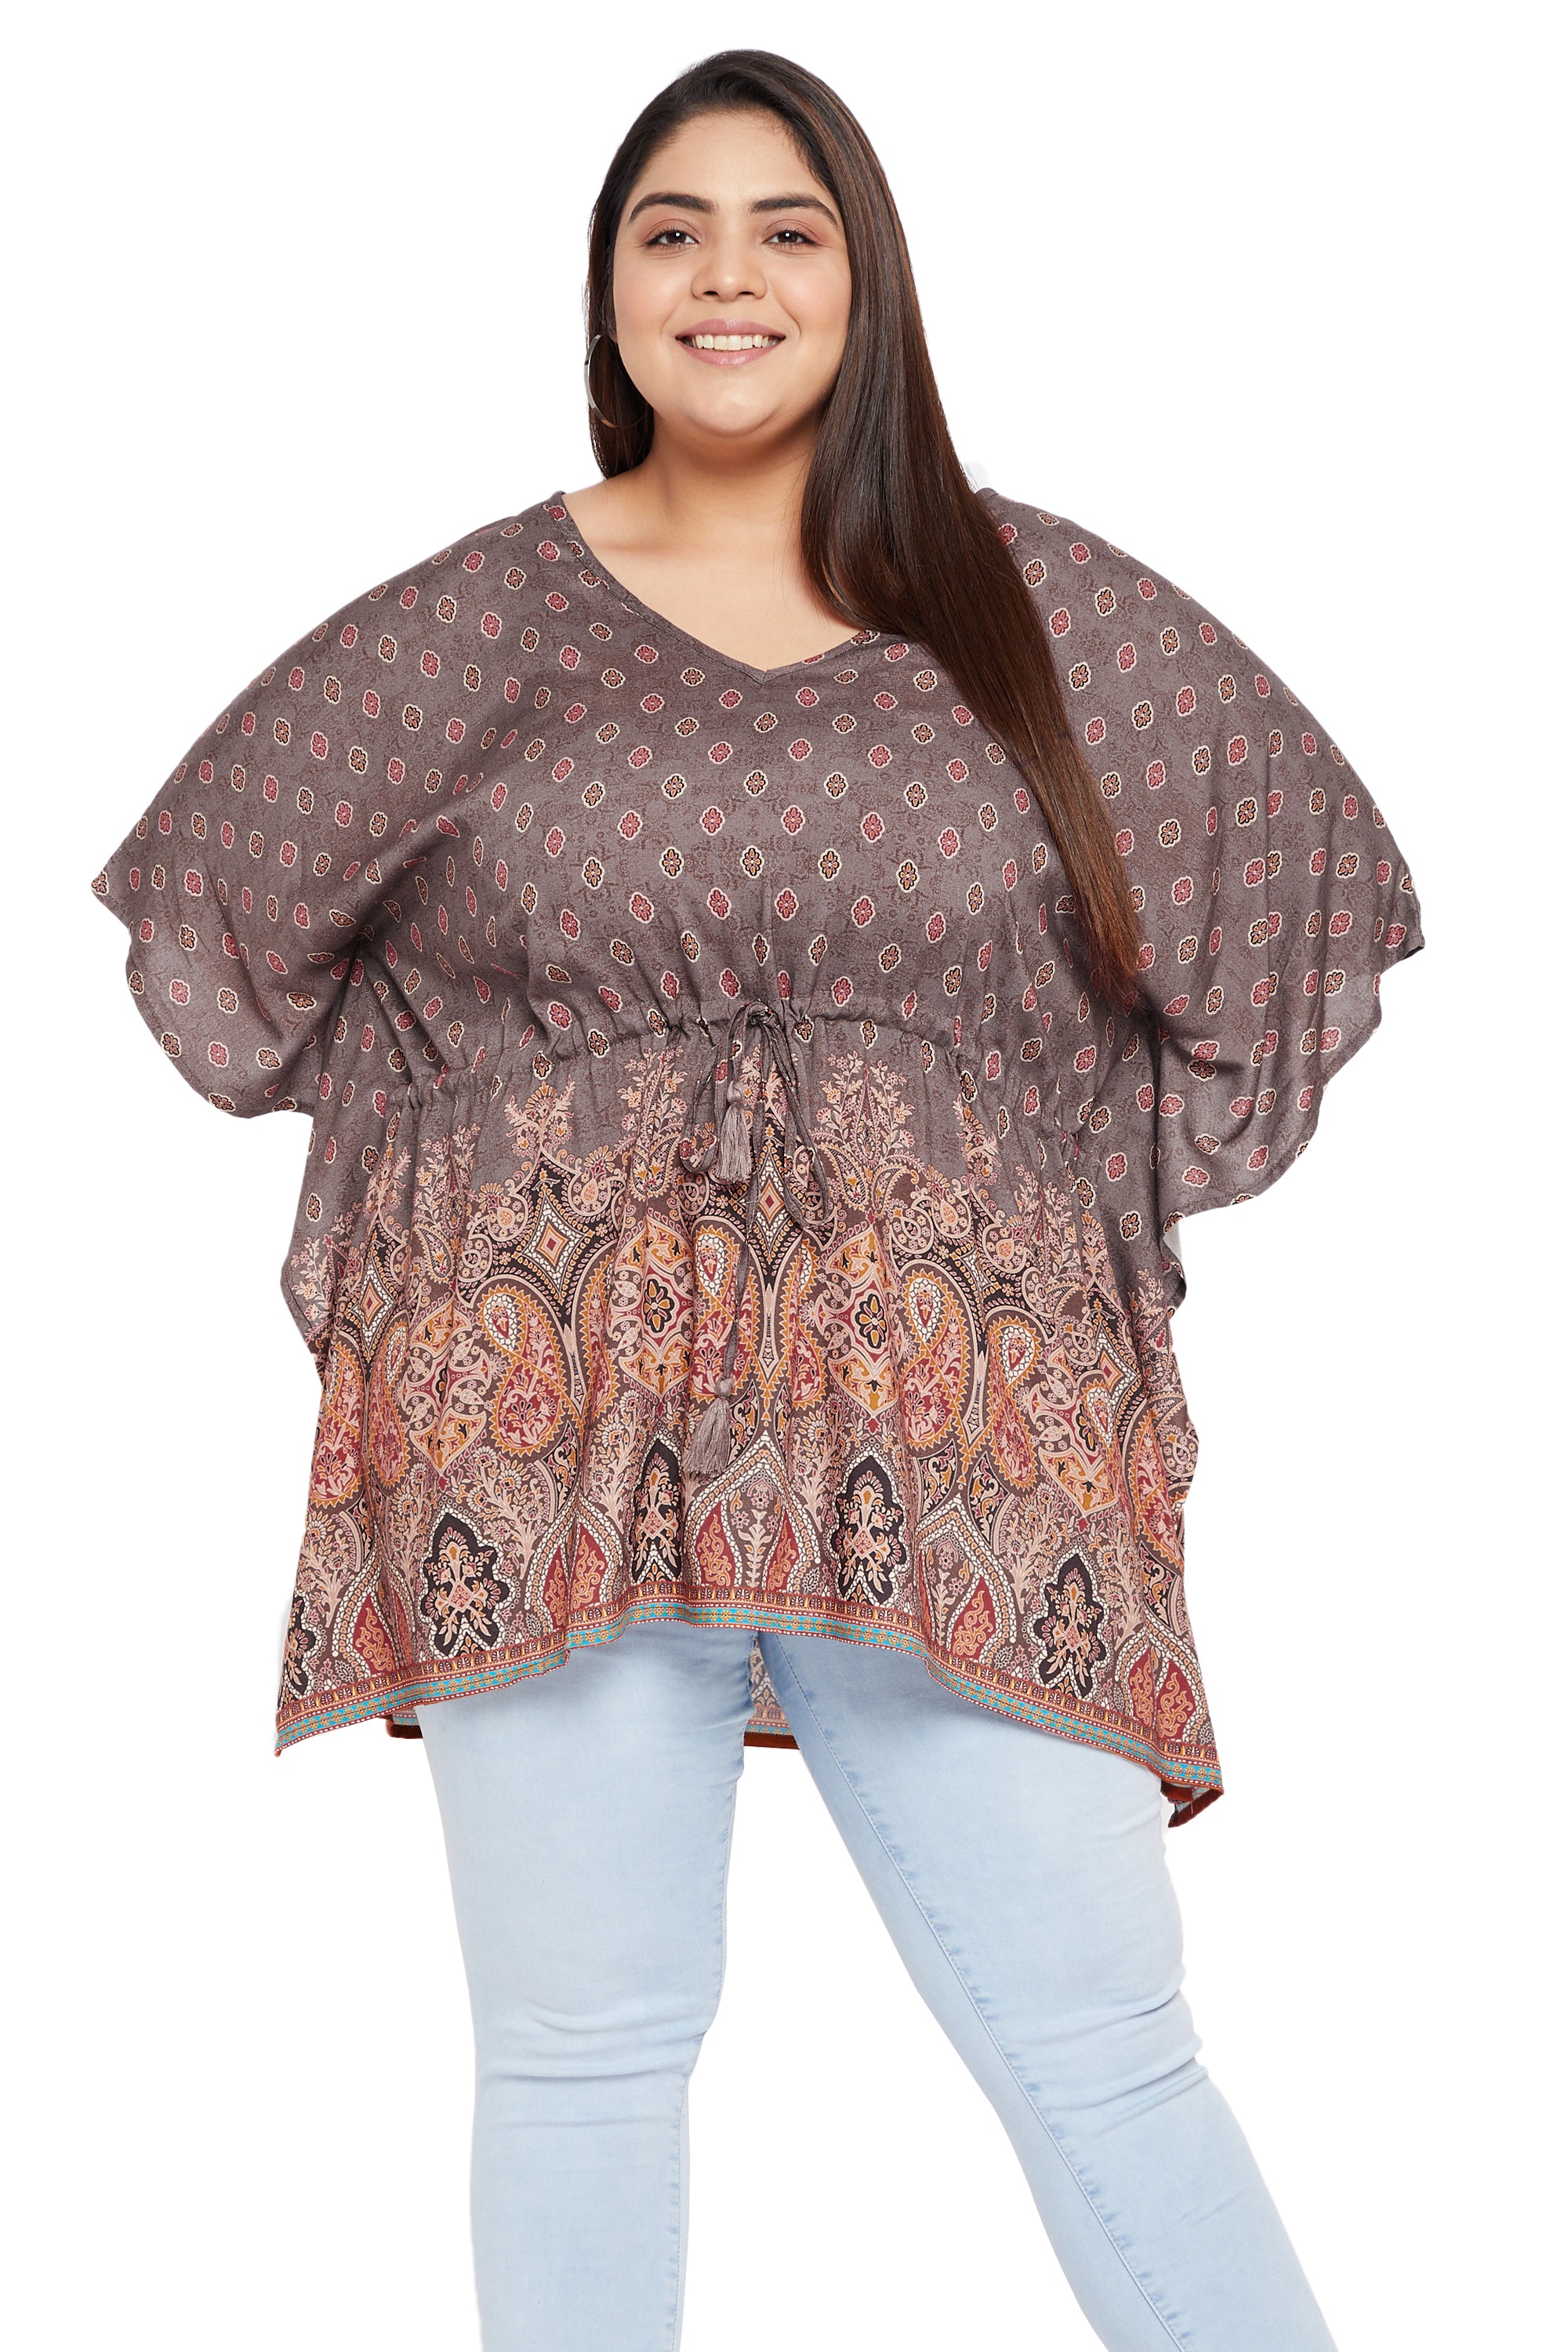 Fascinating brown patterned polka dot rayon plus size tunic top